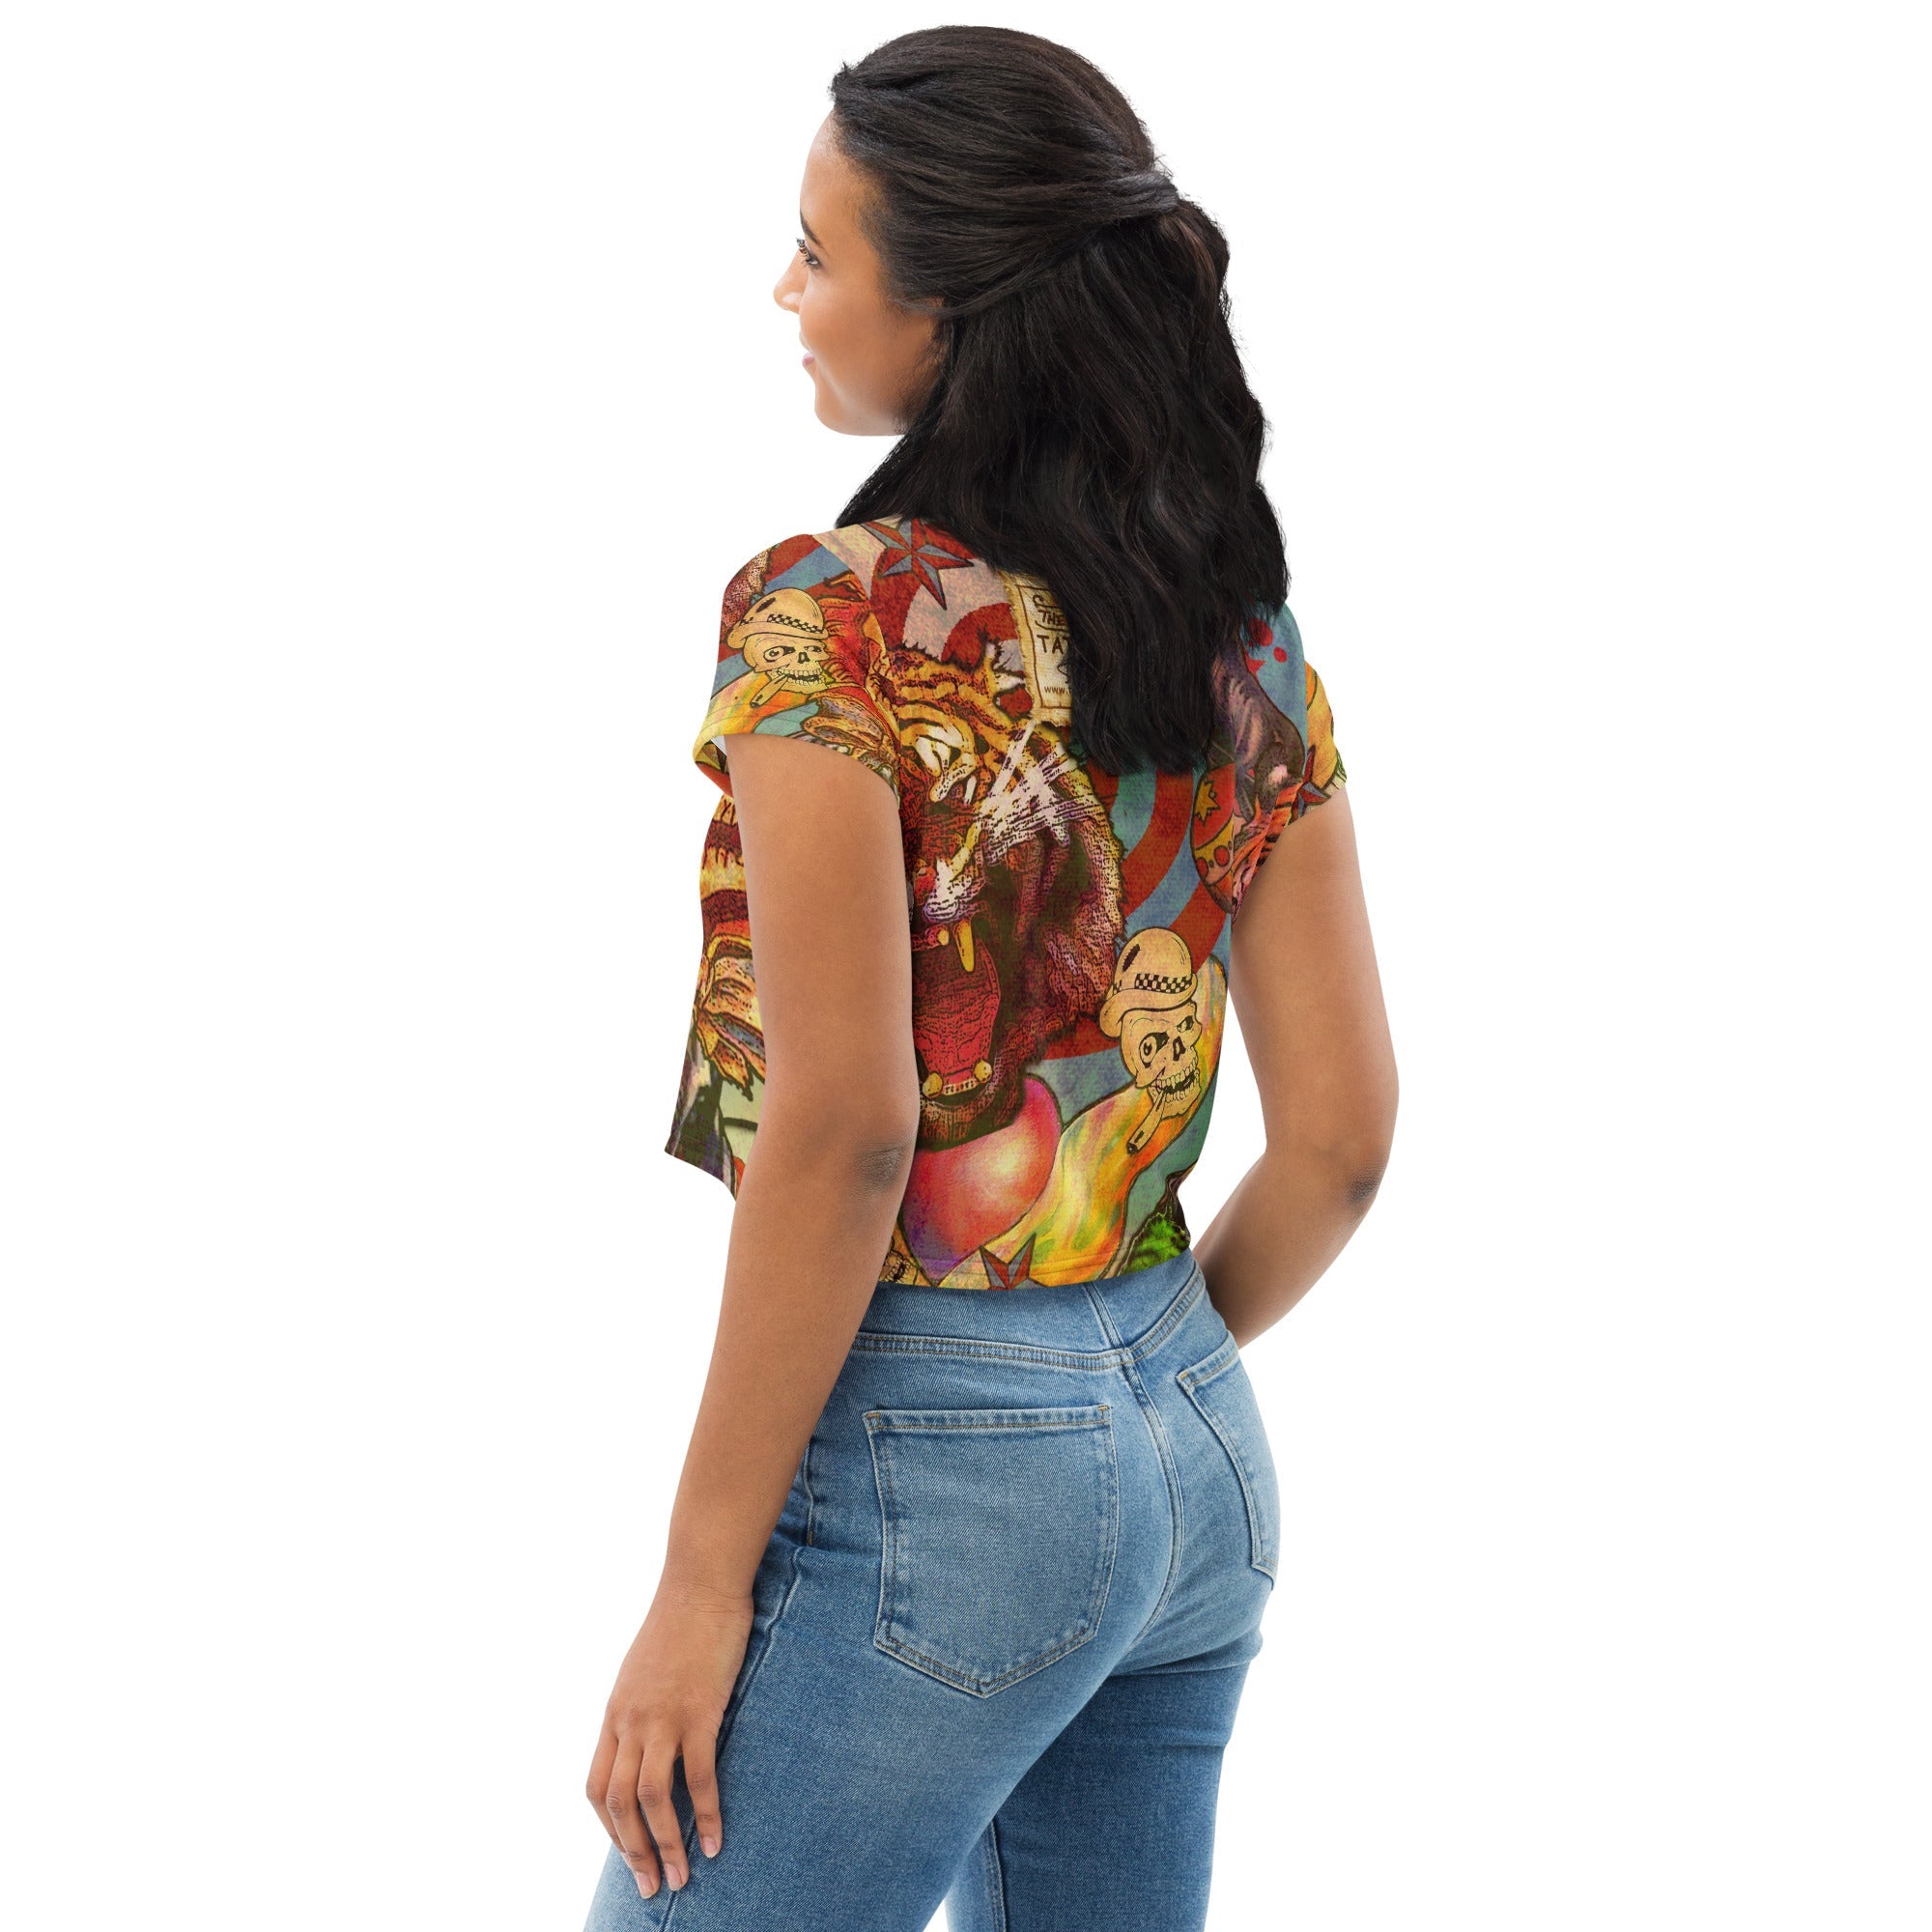 "THE CIRCUS CROP TOP" for women